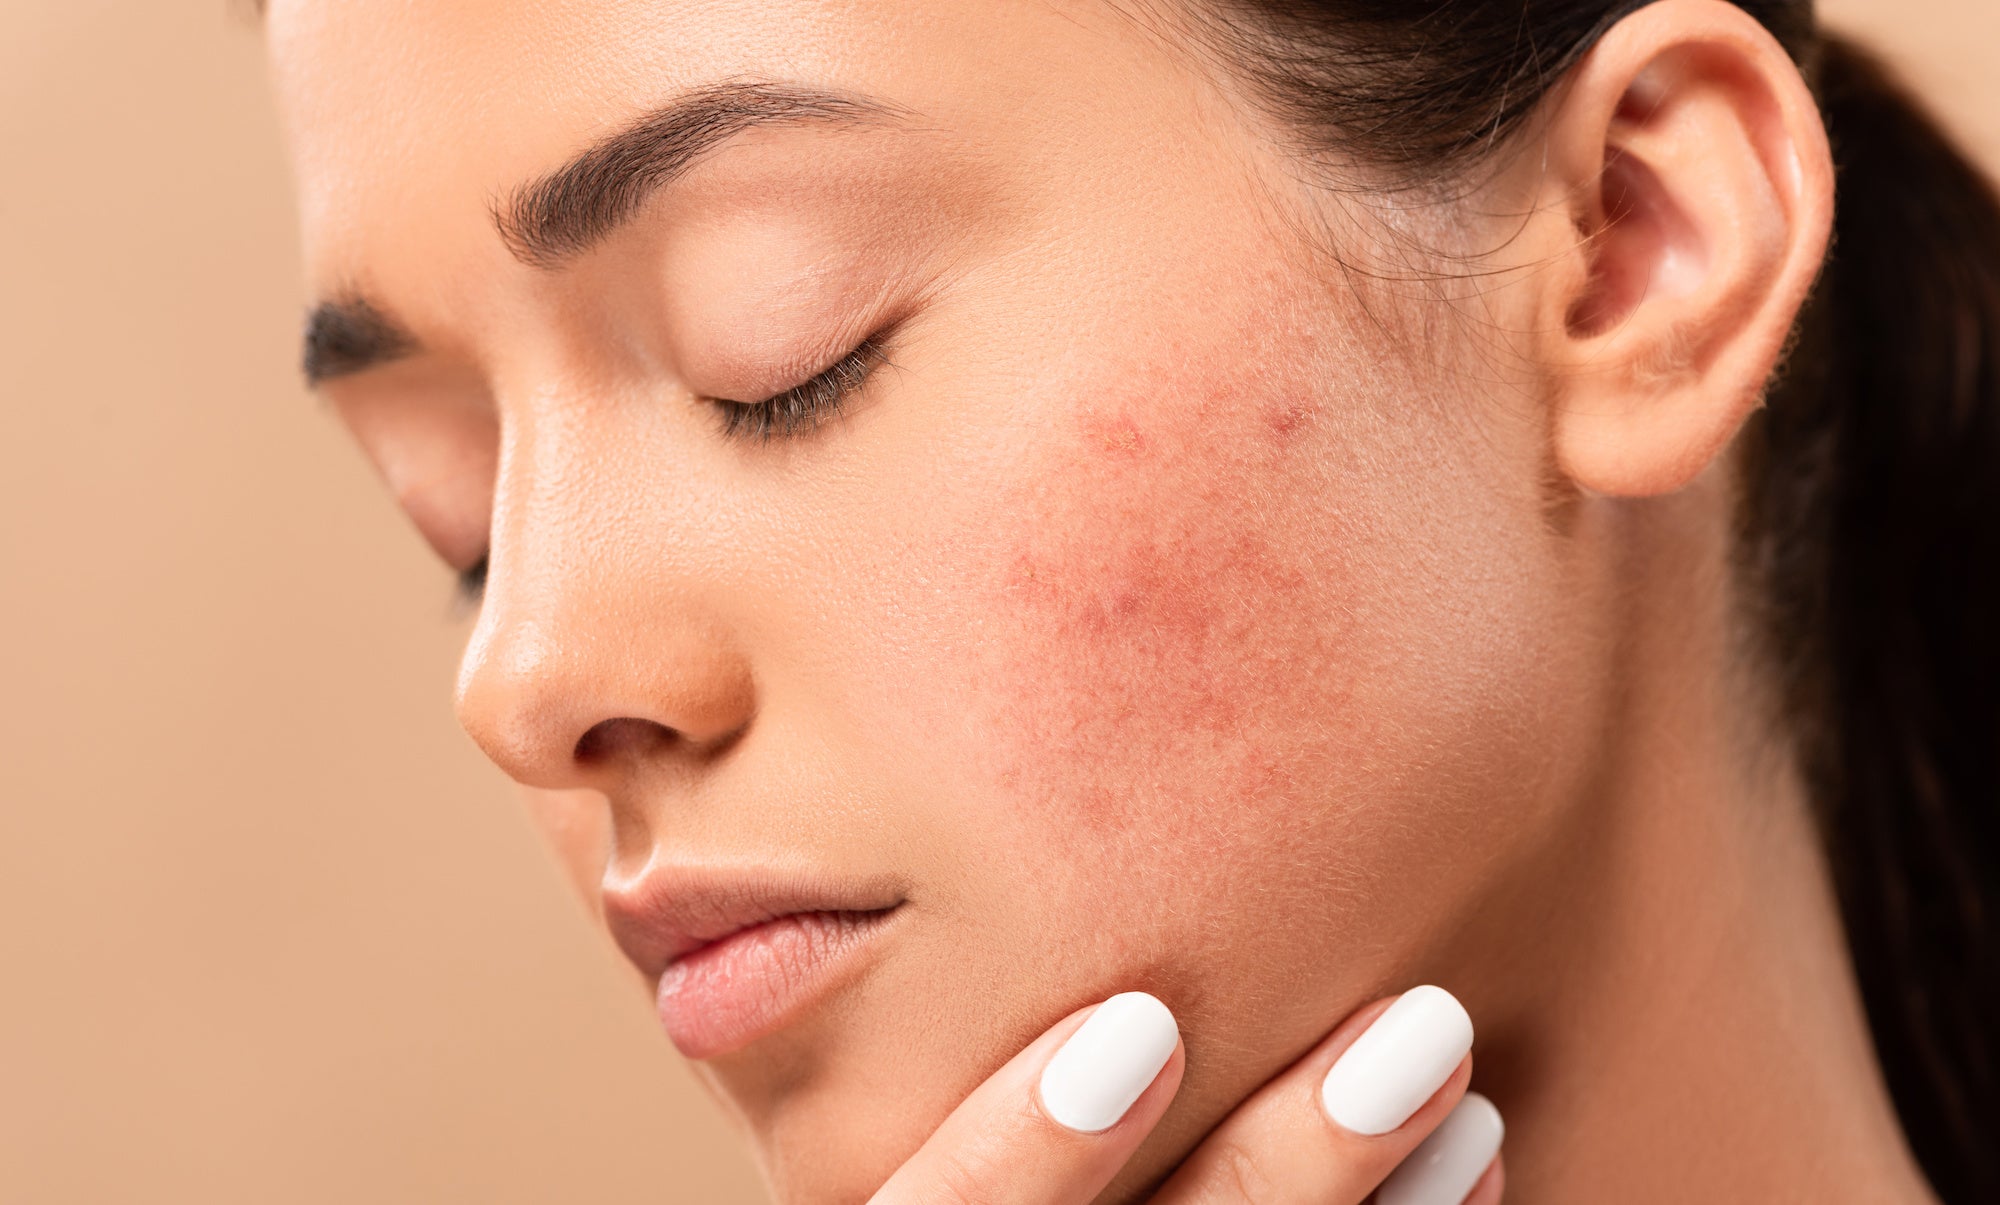 DIY Acne Treatments You Should Avoid and What To Do Instead